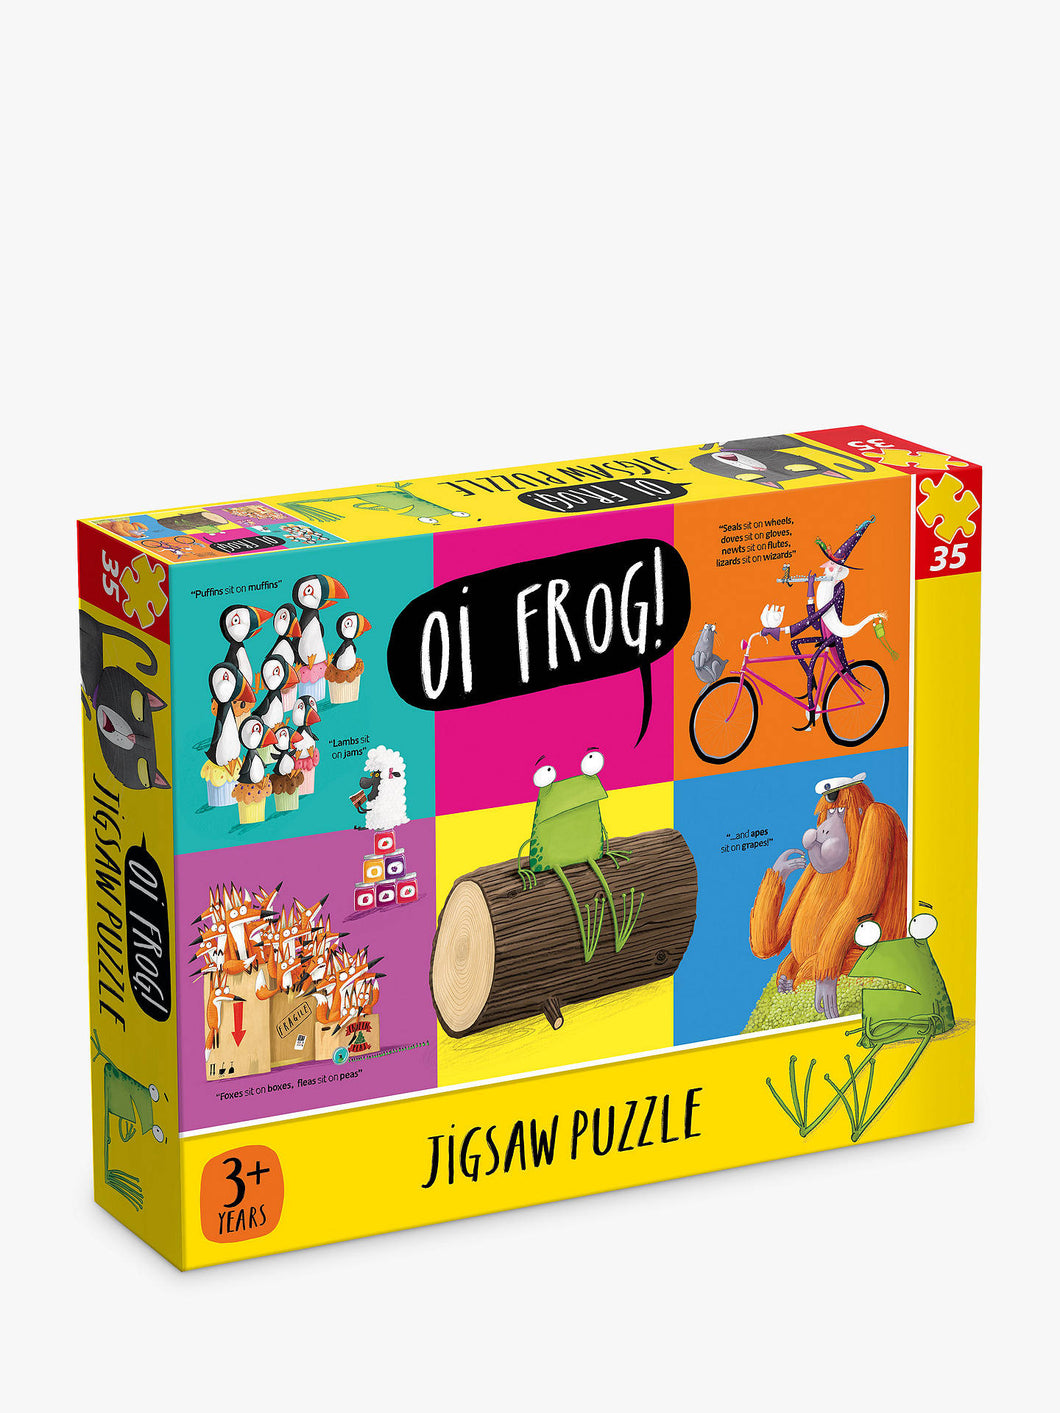 Oi Frog Jigsaw Puzzle